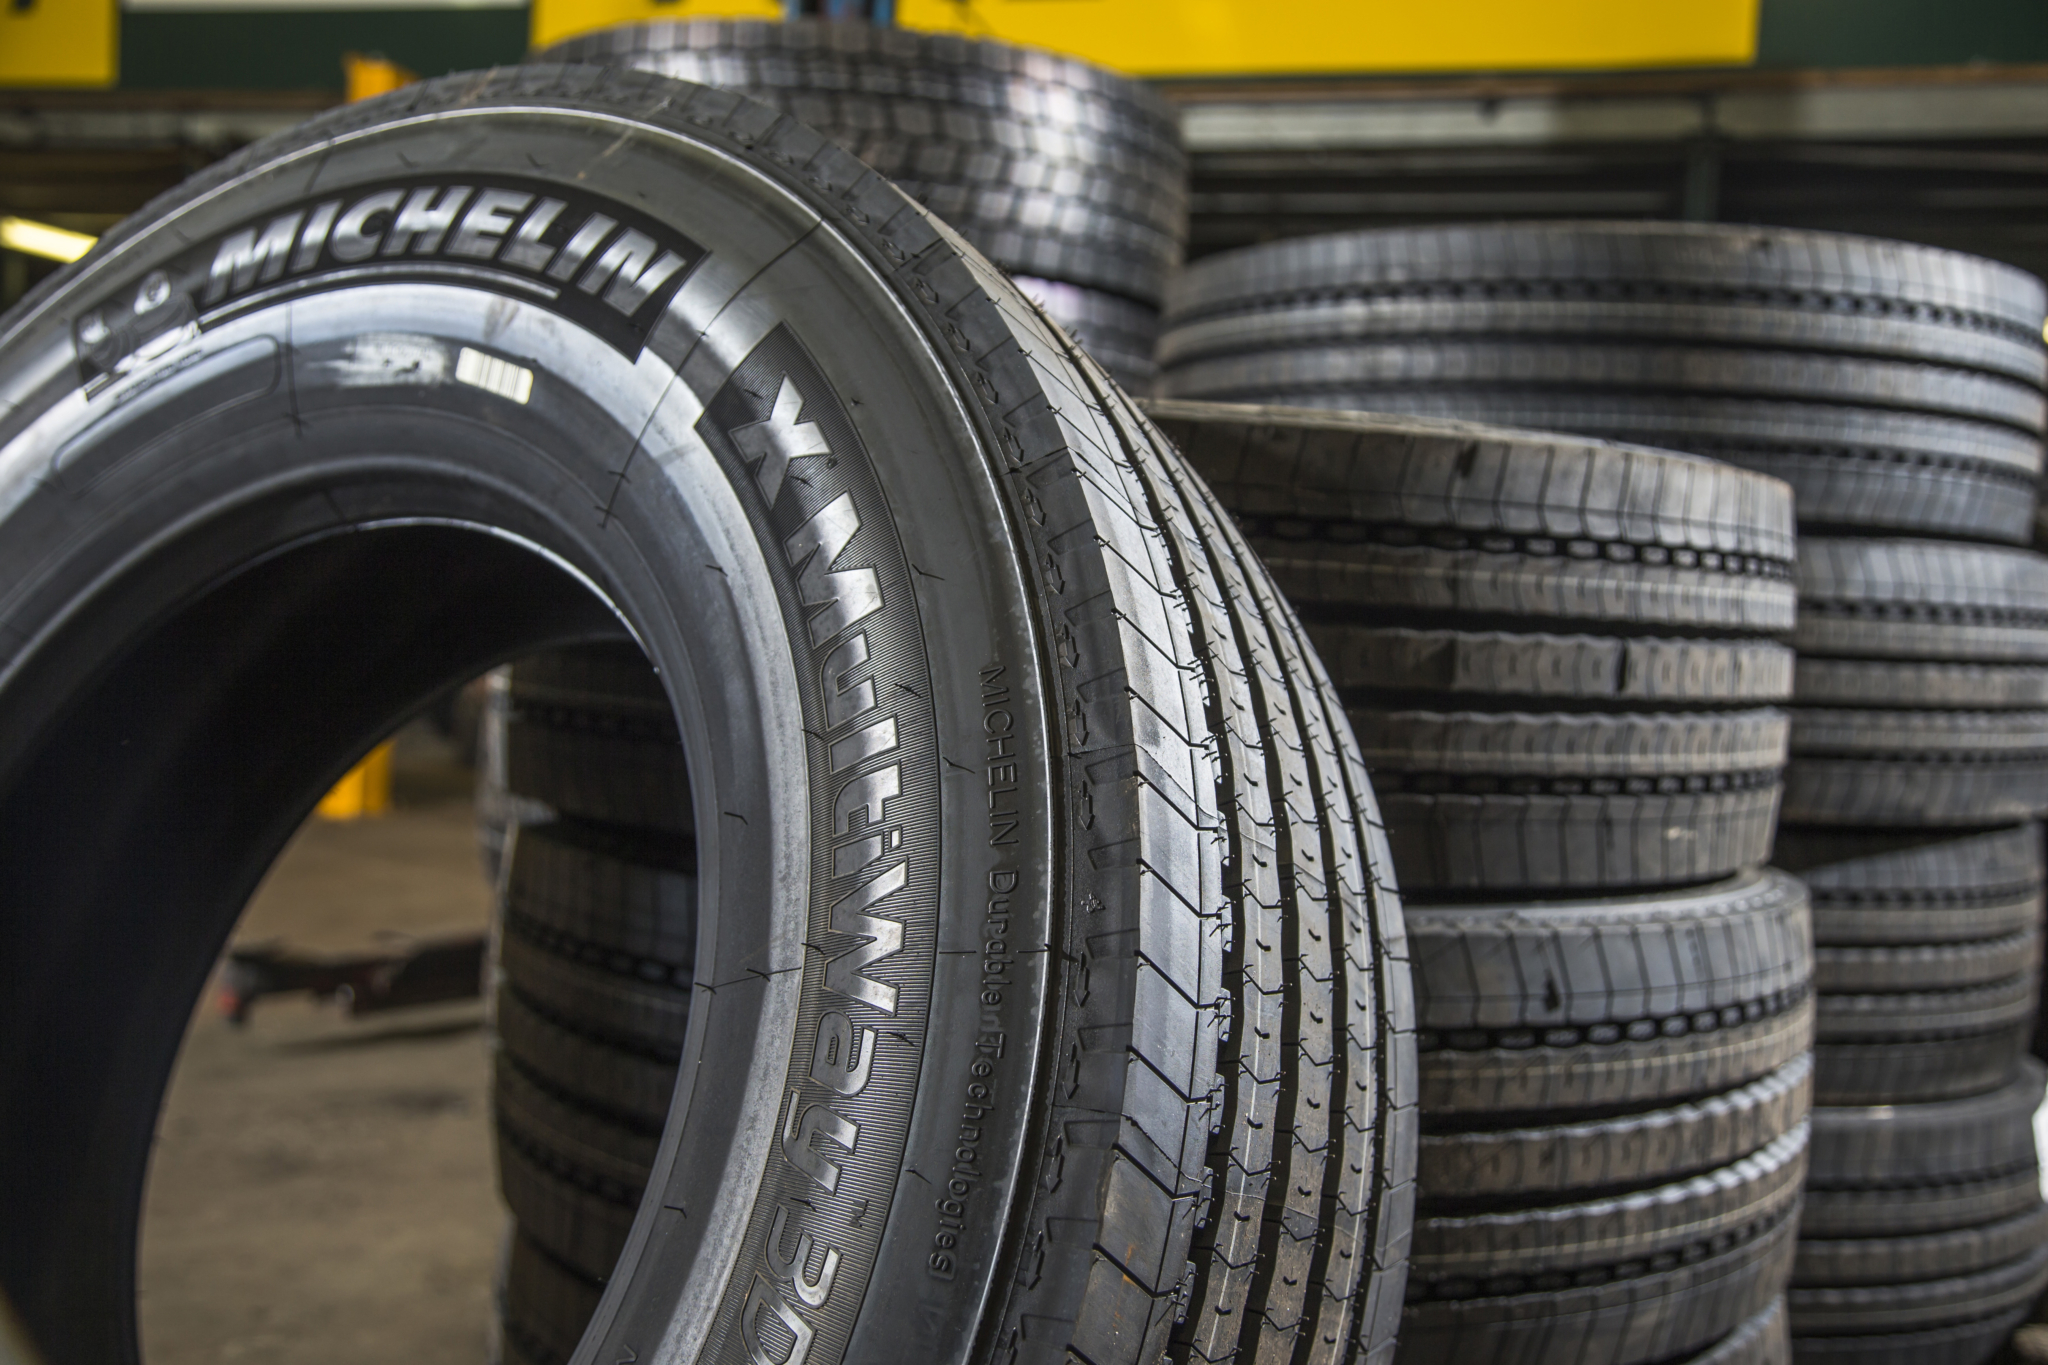 Michelin Stoke up-and-running, looking forward to ‘steady market growth’